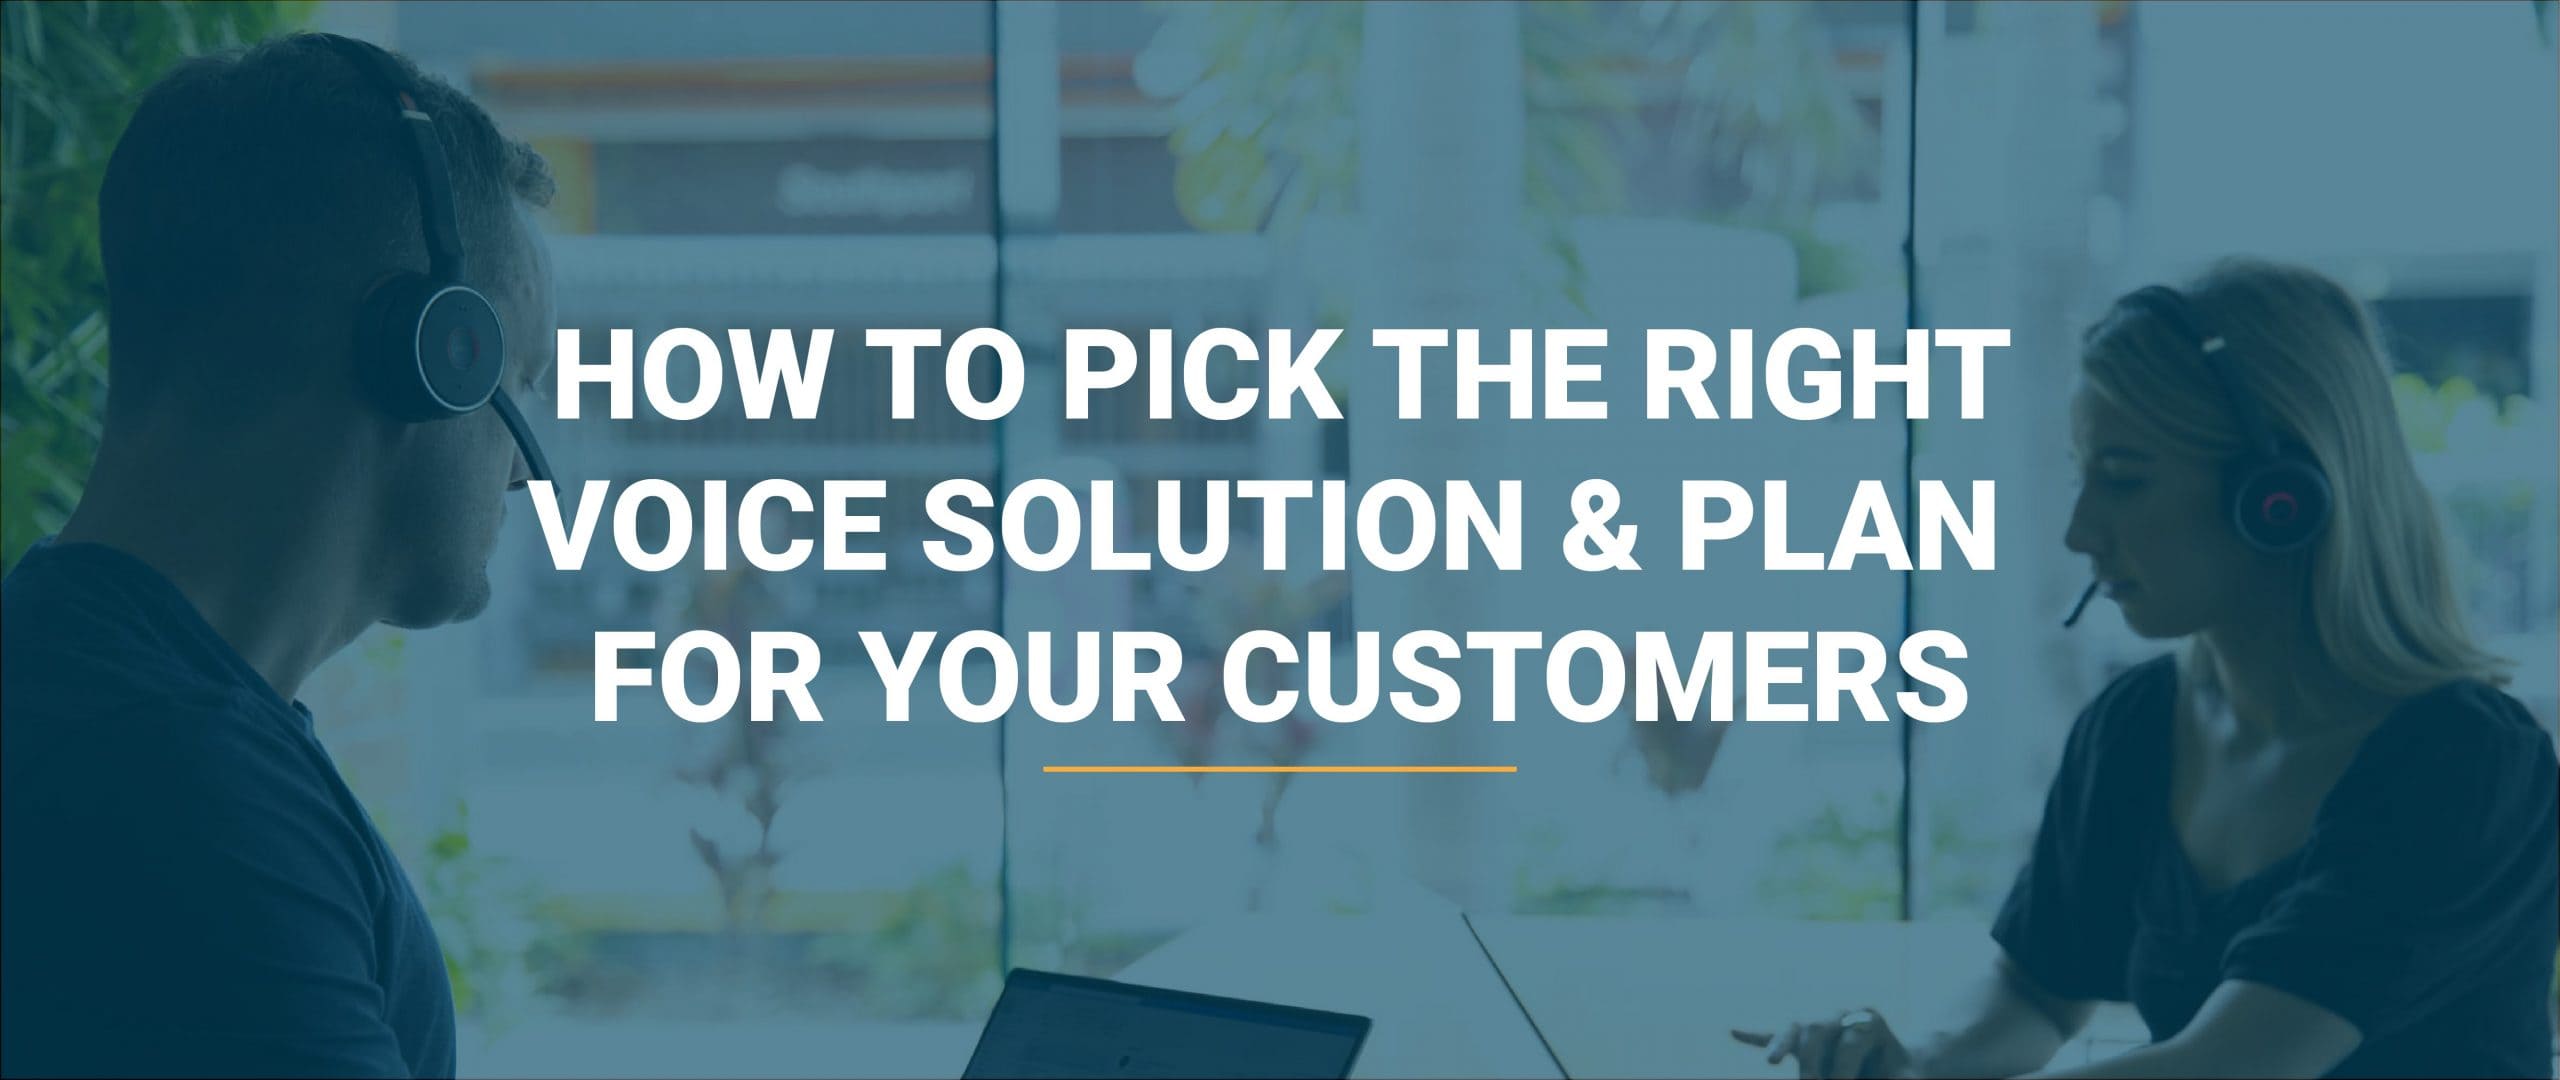 How to pick the right voice solution and plan for your customers